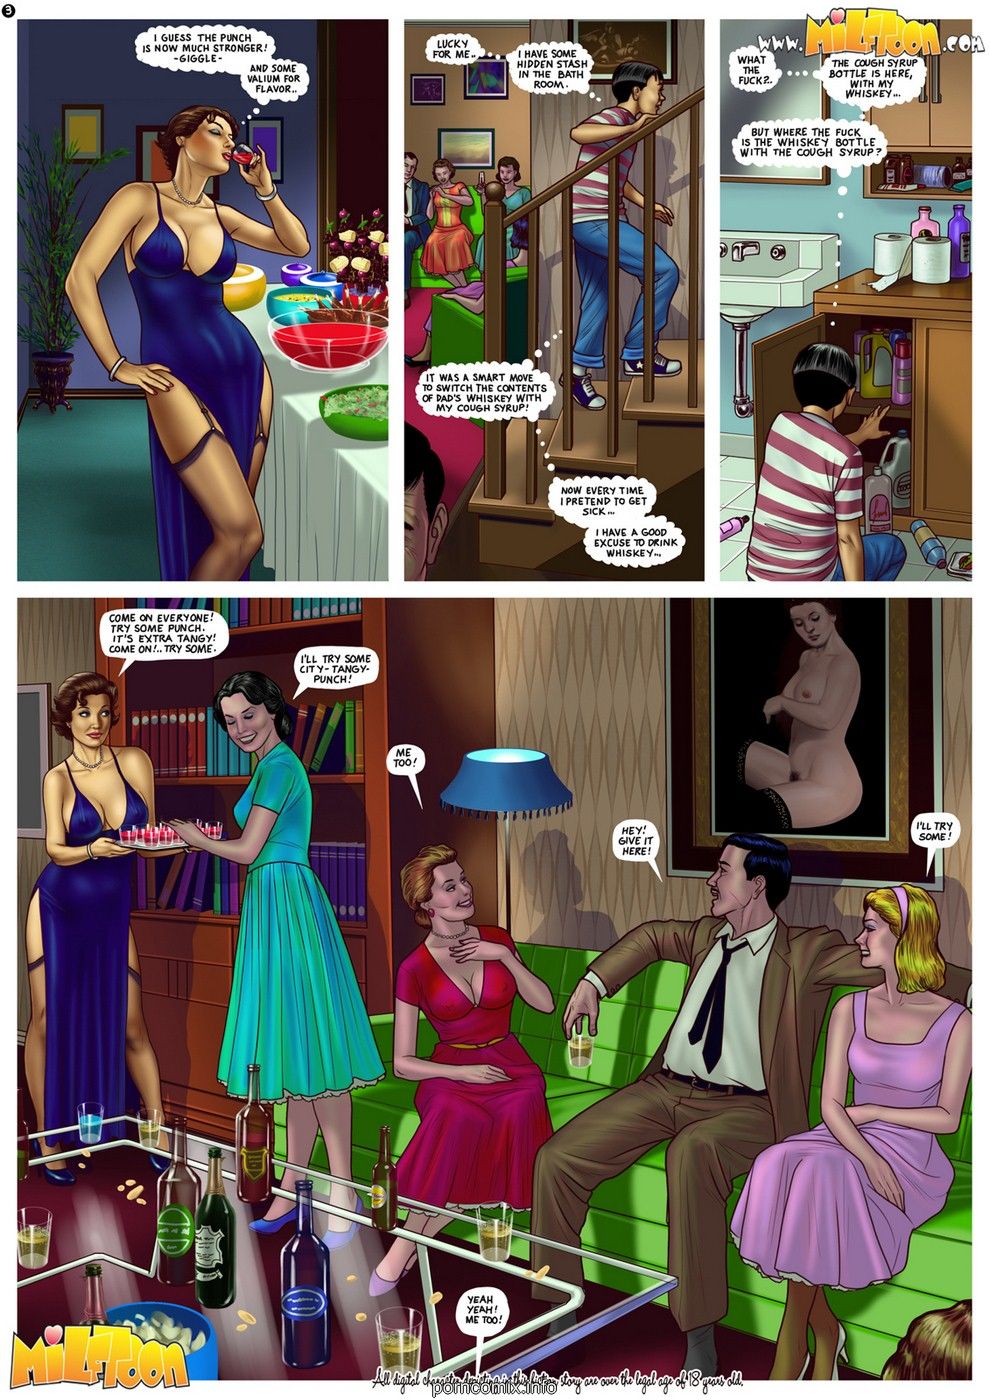 Milftoon - Enjoy the Party-Mom Son Incest page 3